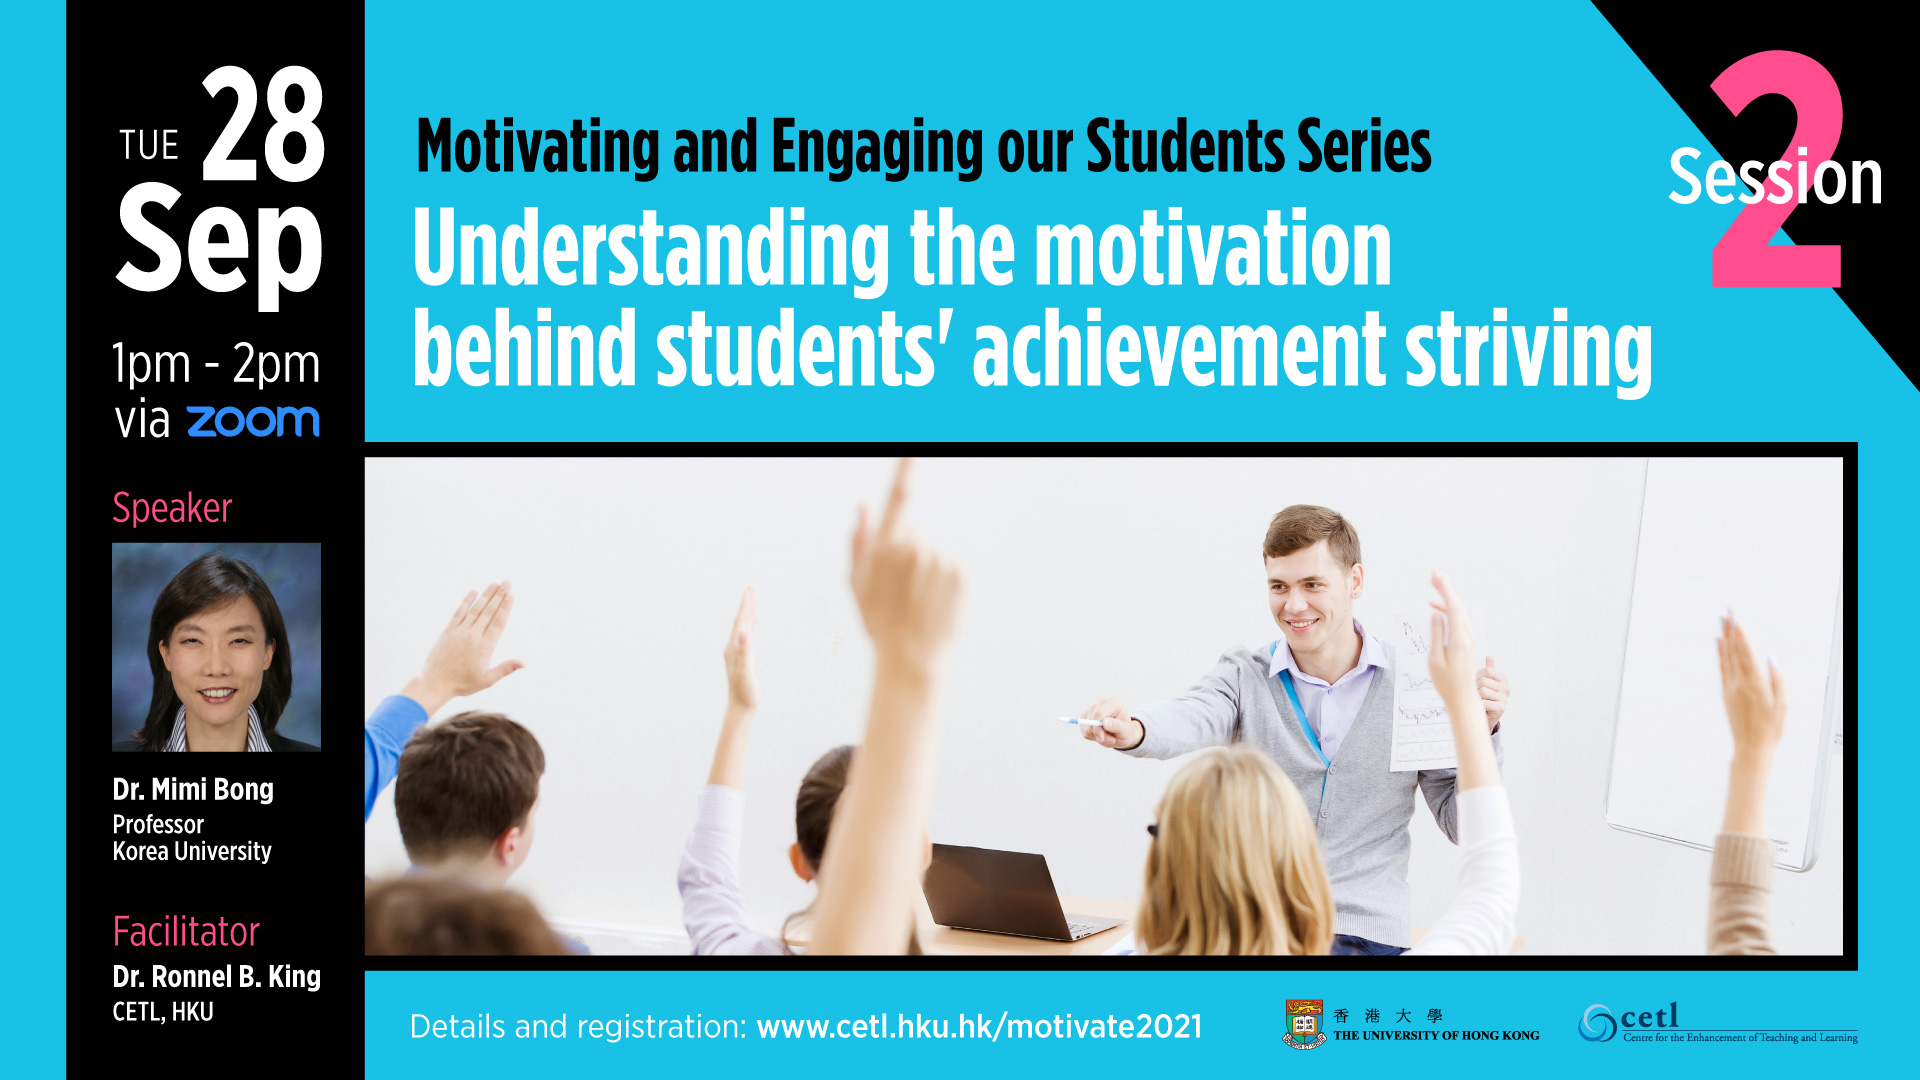 Session 2: Understanding the motivation behind students' achievement striving